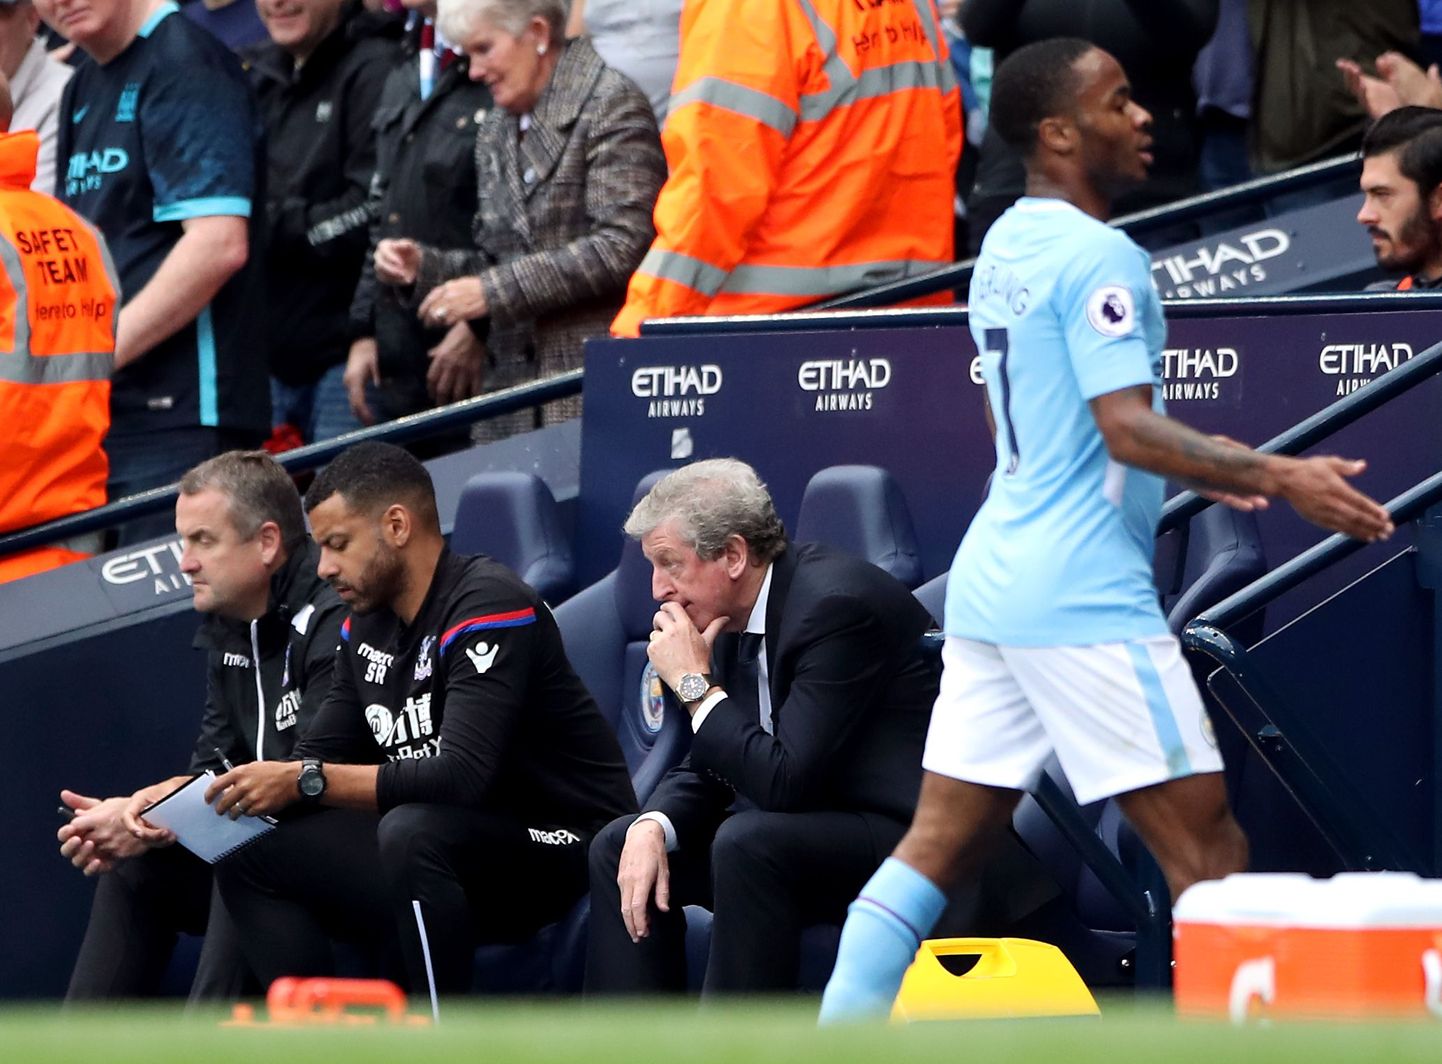 Crystal Palace manager Roy Hodgson on the bench during the Premier League match at the Etihad Stadium, Manchester.